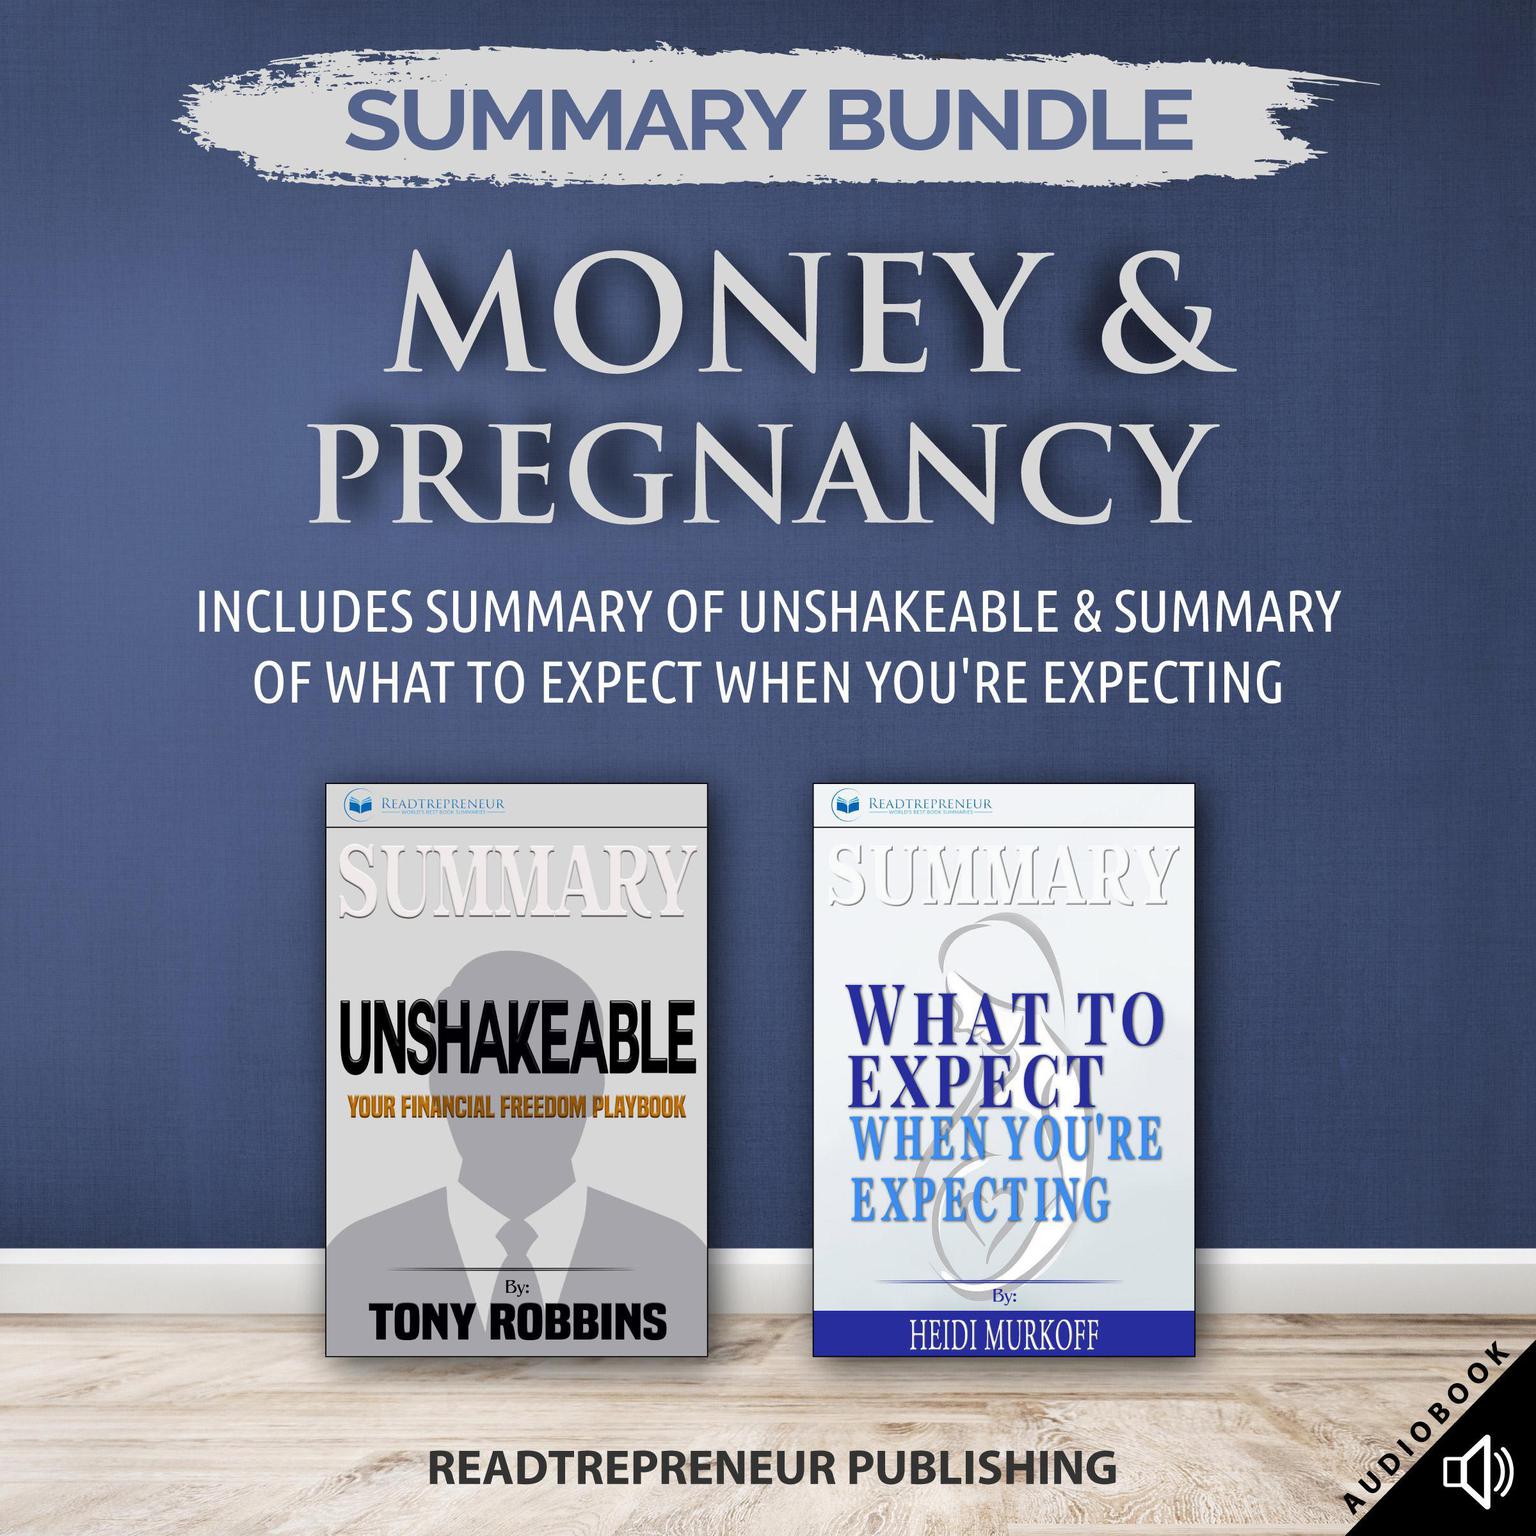 Summary Bundle: Money & Pregnancy | Readtrepreneur Publishing: Includes Summary of Unshakeable & Summary of What to Expect When Youre Expecting: Includes Summary of Unshakeable & Summary of What to Expect When You’re Expecting Audiobook, by Readtrepreneur Publishing